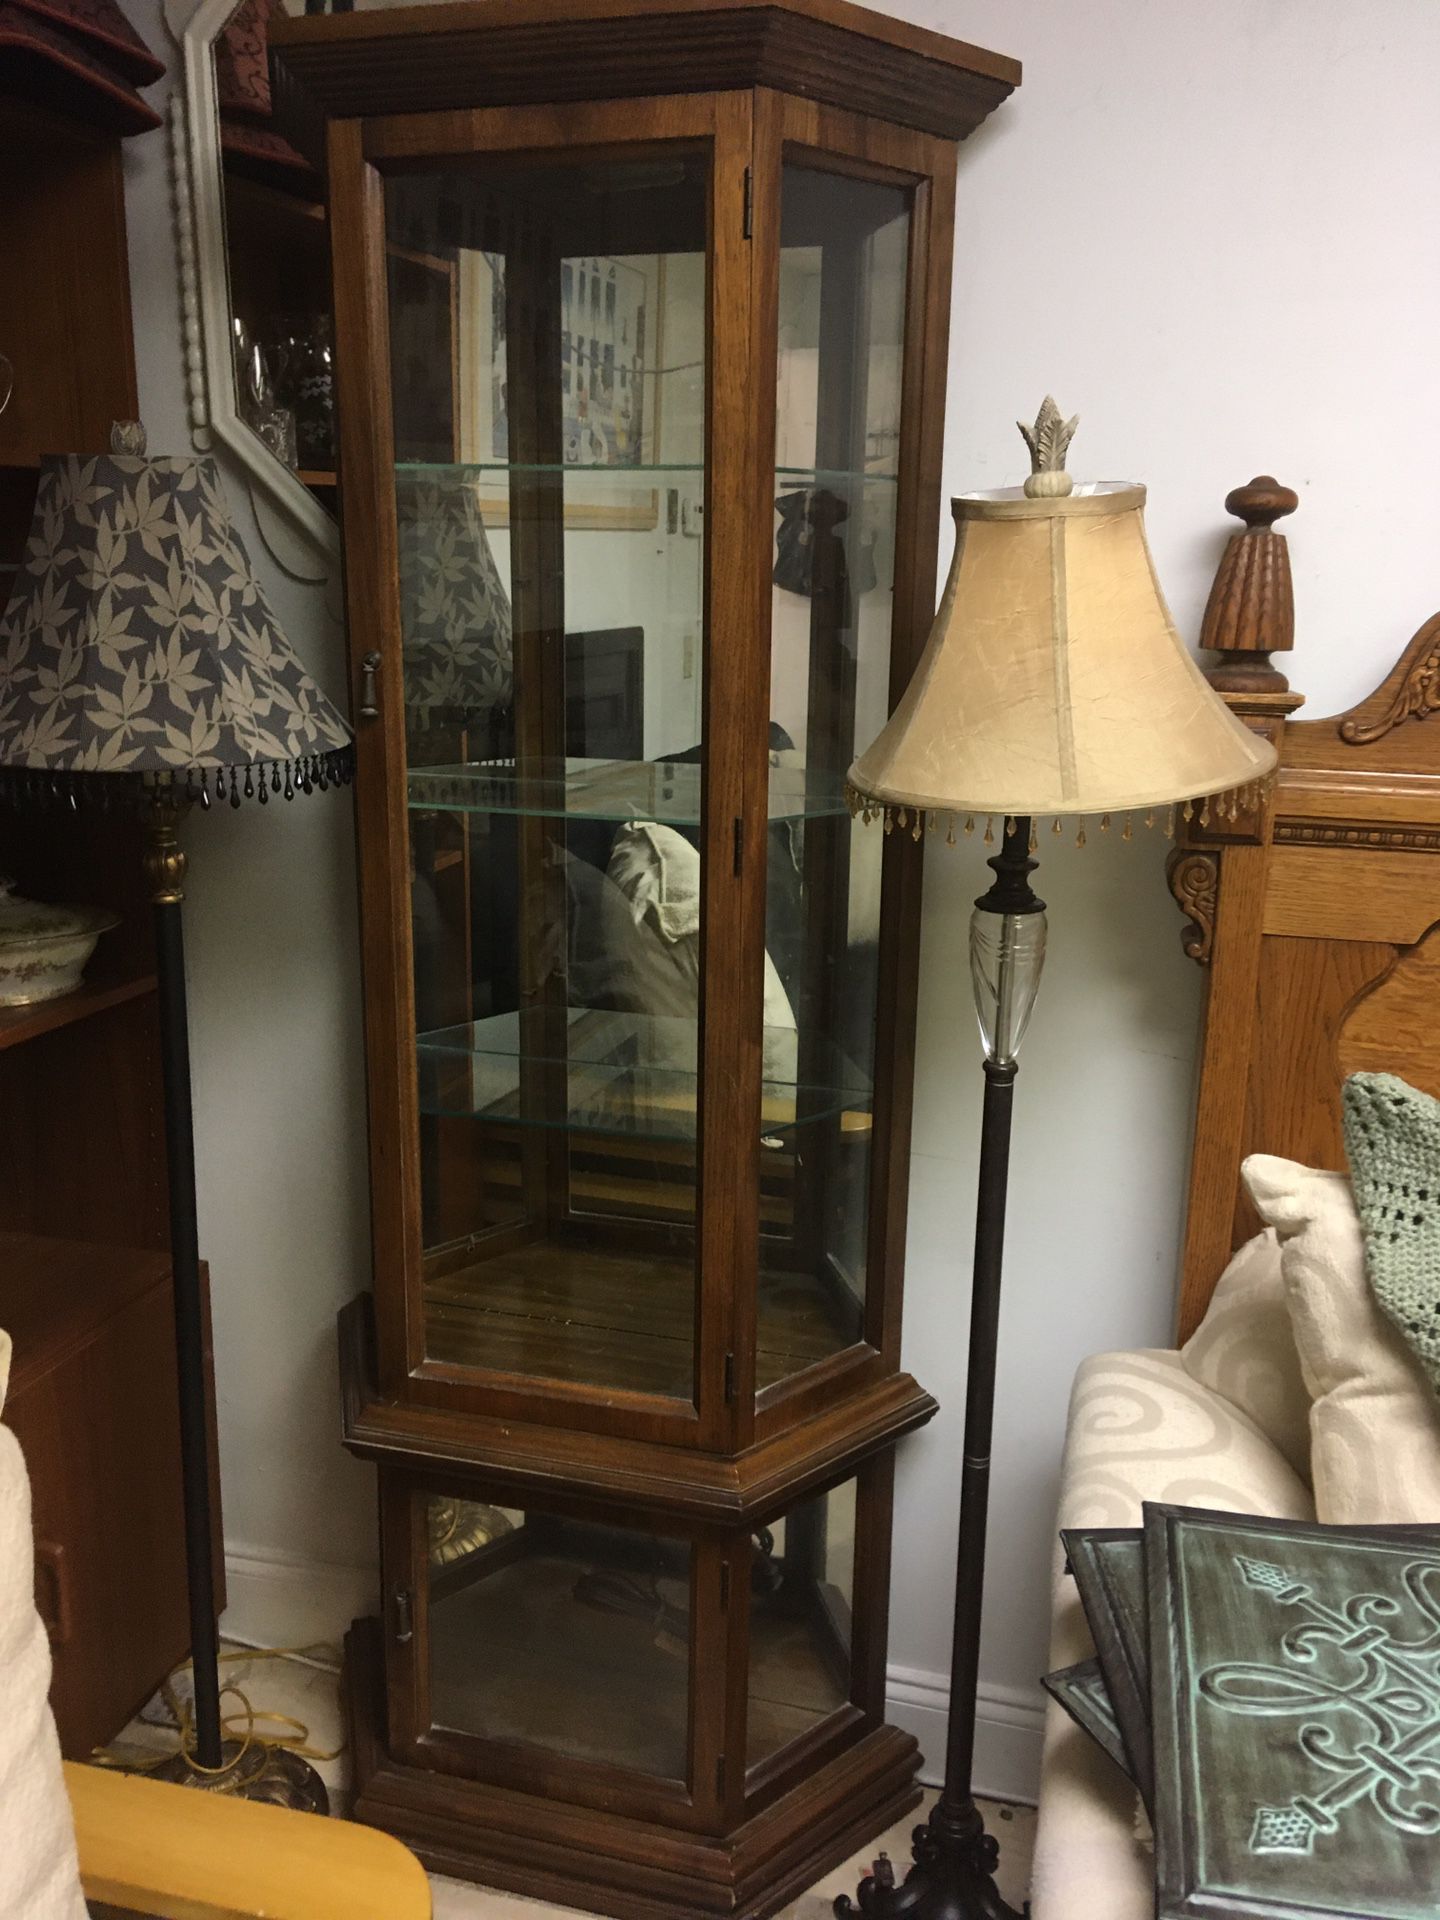 💥SALE!💥TALL VINTAGE CURIO CABINET MIRROR BACK GLASS SHELVES LOGHT 72”h *YES ITS STILL AVAIL!